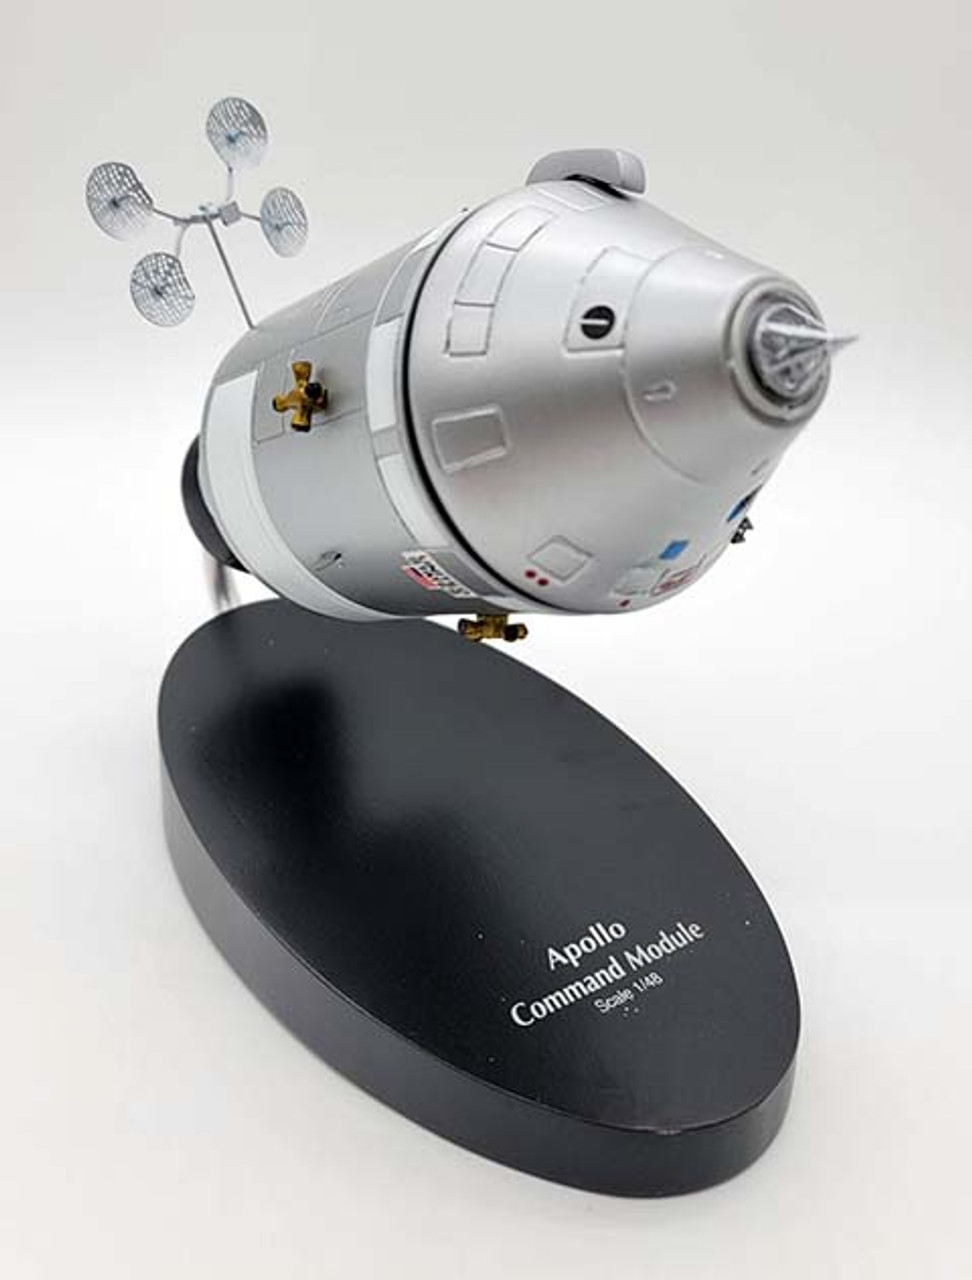 spacecraft scale models